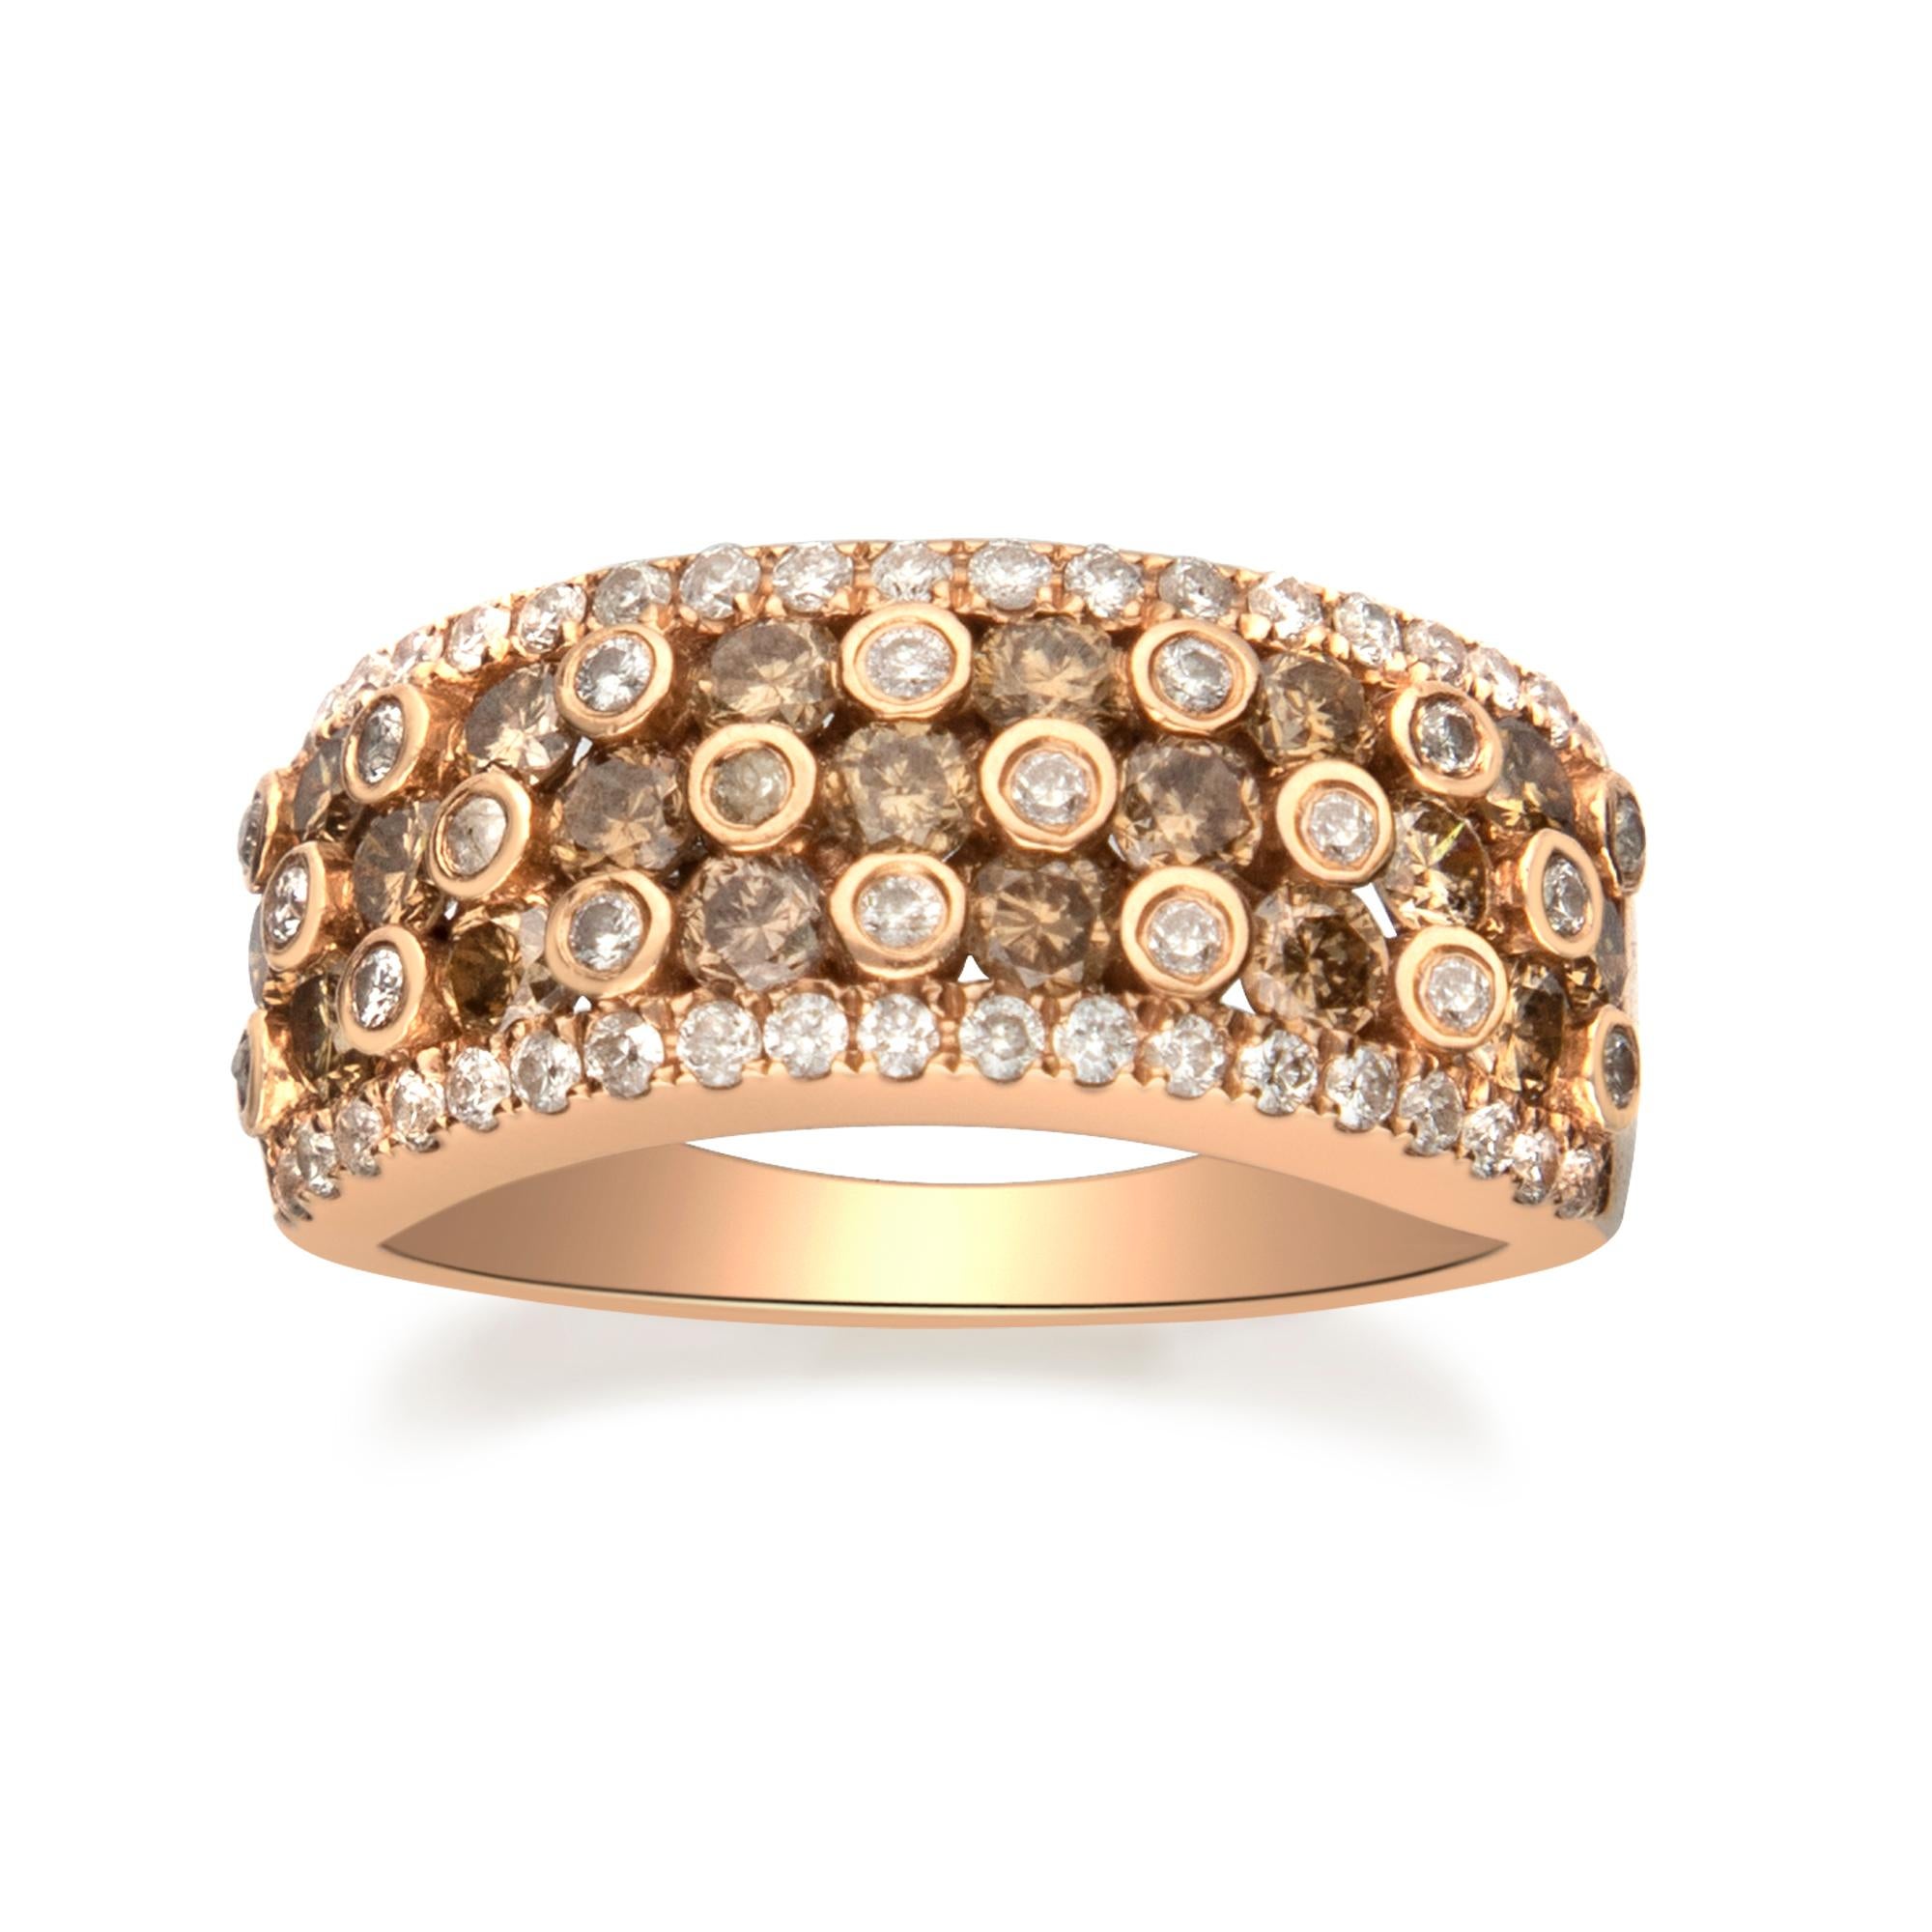  1.07 Carat Brown Diamond and White Diamond 14 Karat Rose Gold Ring In New Condition For Sale In New York, NY